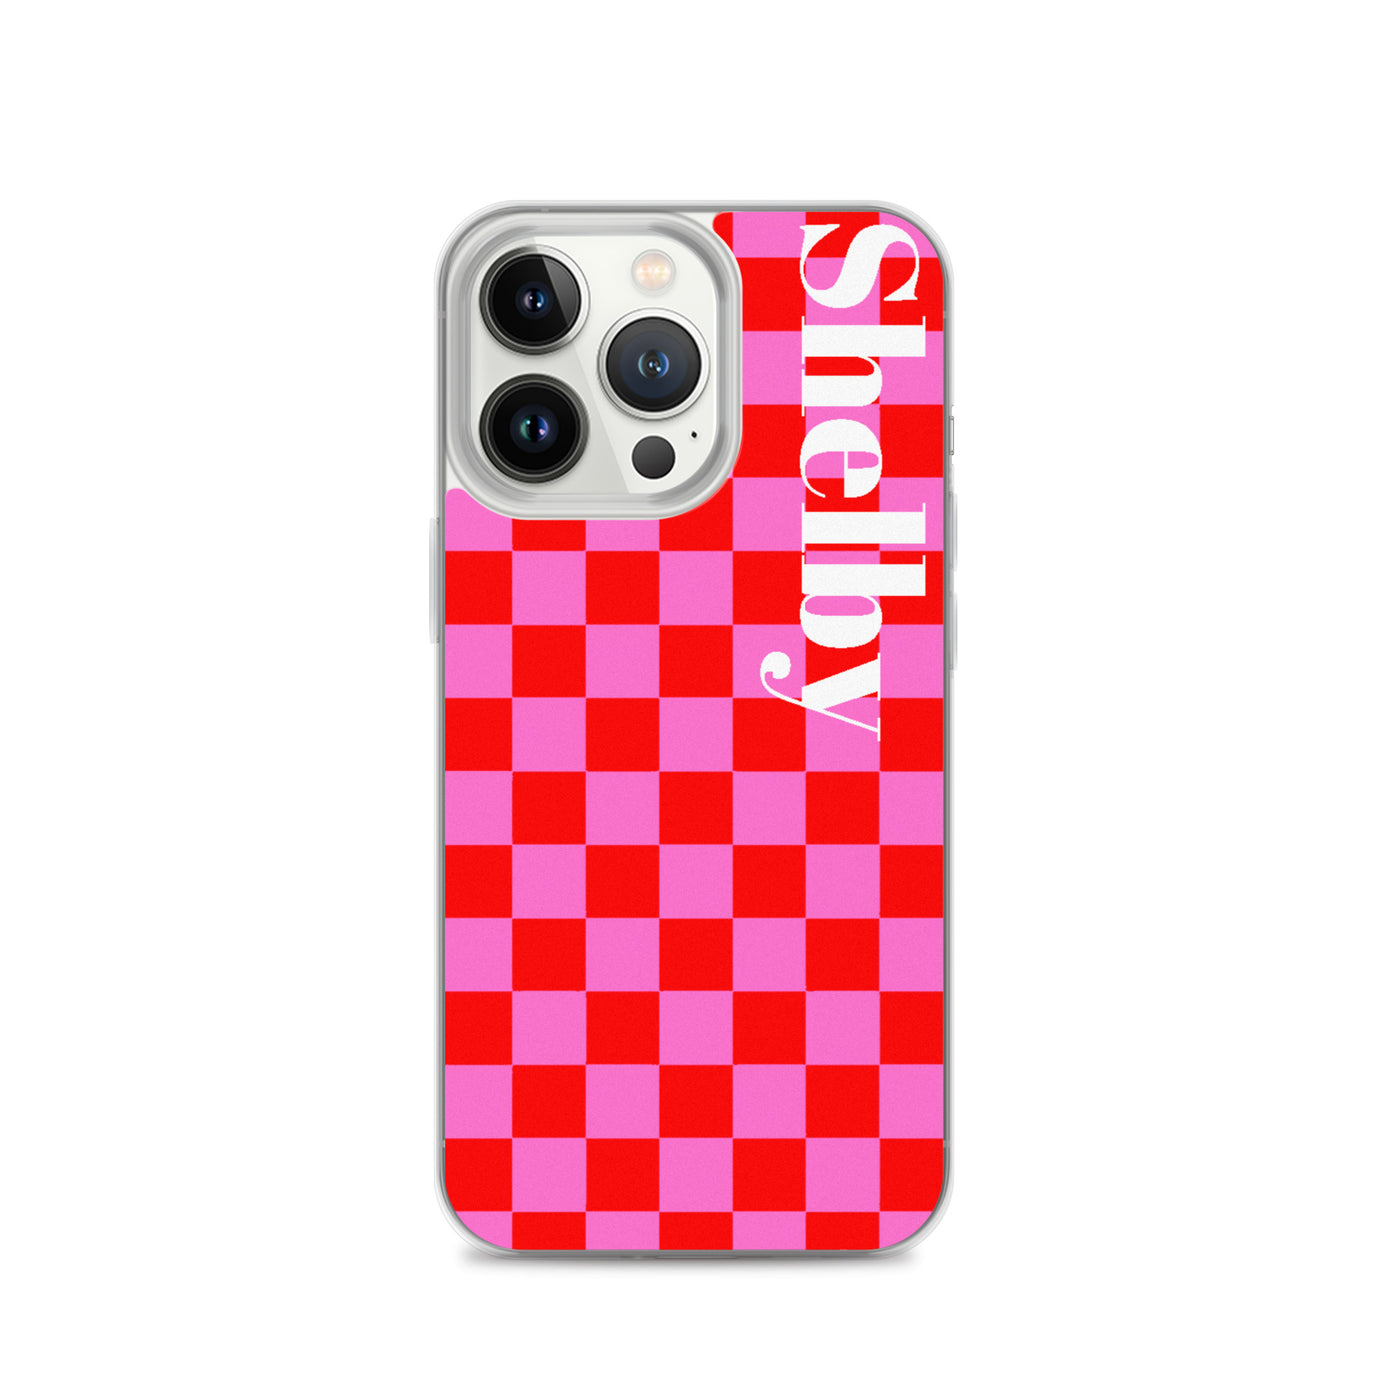 Make It Yours™ Check Pattern iPhone Case